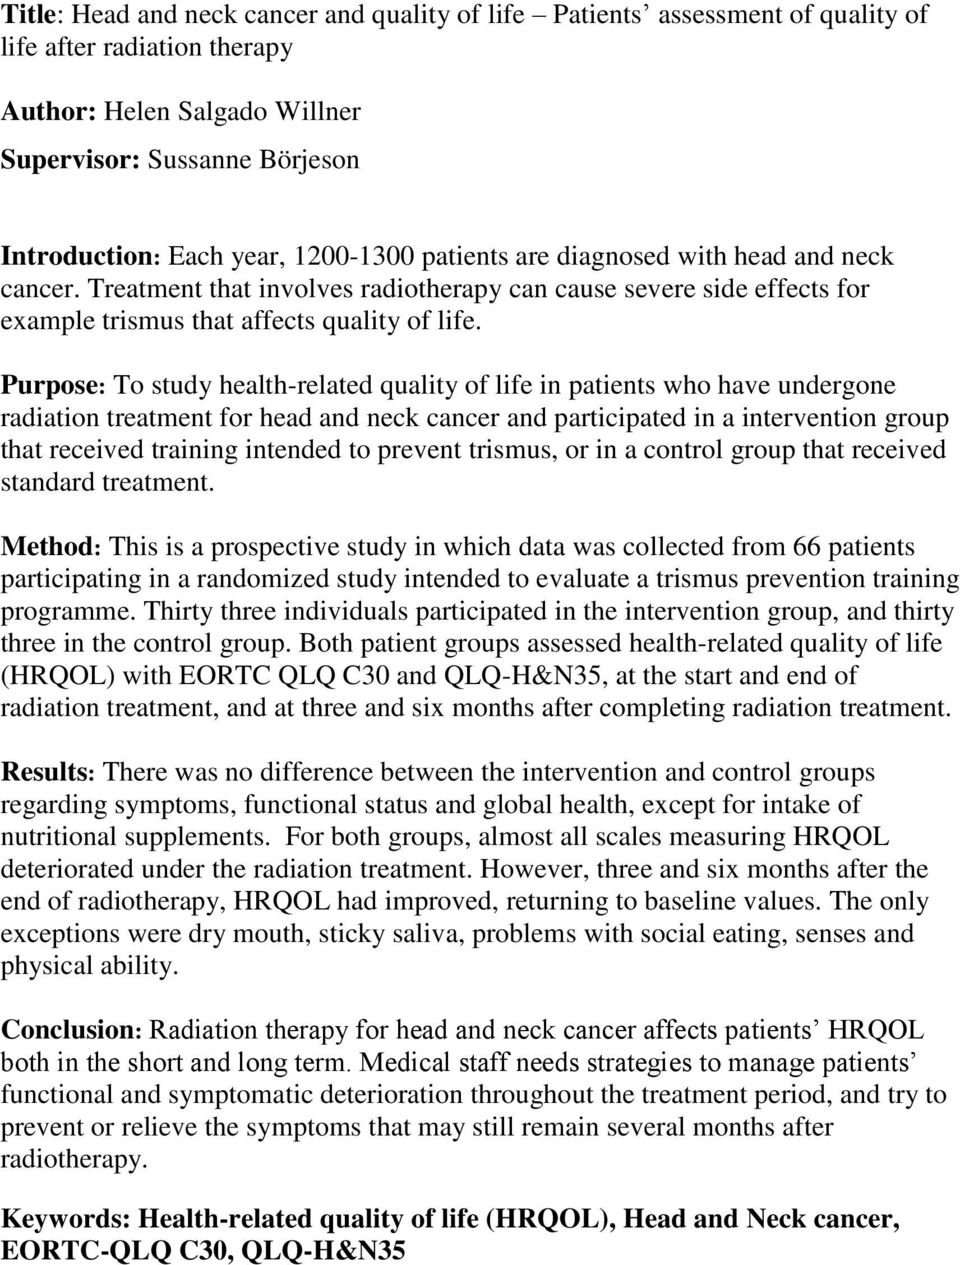 Purpose: To study health-related quality of life in patients who have undergone radiation treatment for head and neck cancer and participated in a intervention group that received training intended